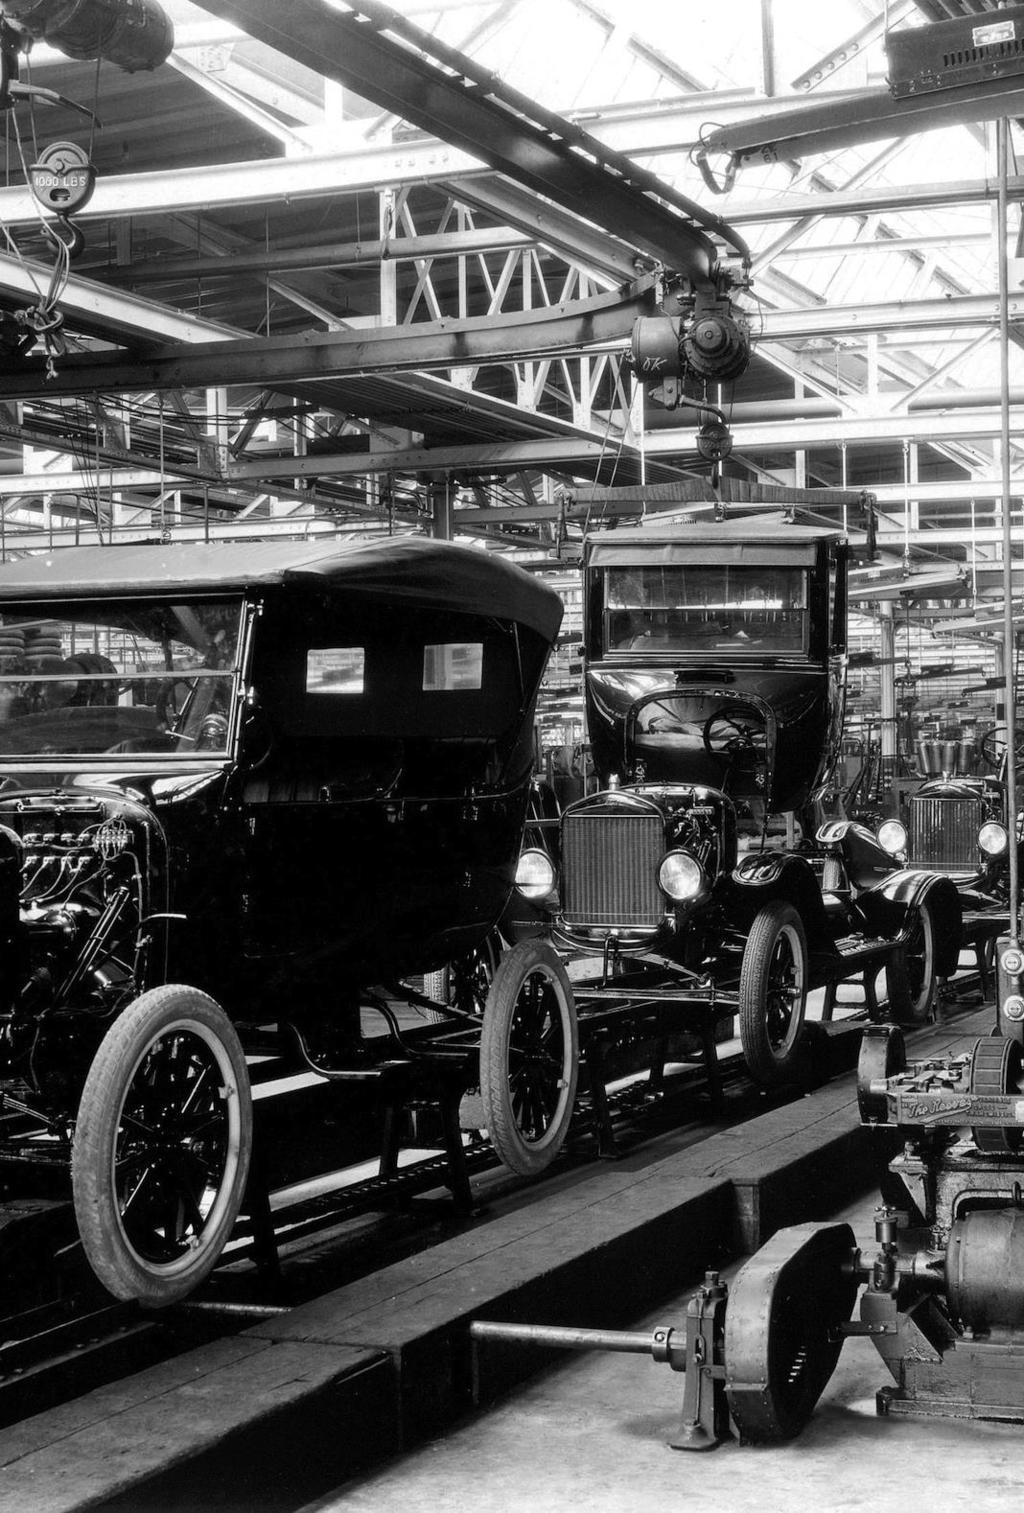 American Industries Flourish Ford s Model T Price Built using an assembly line used conveyer belts